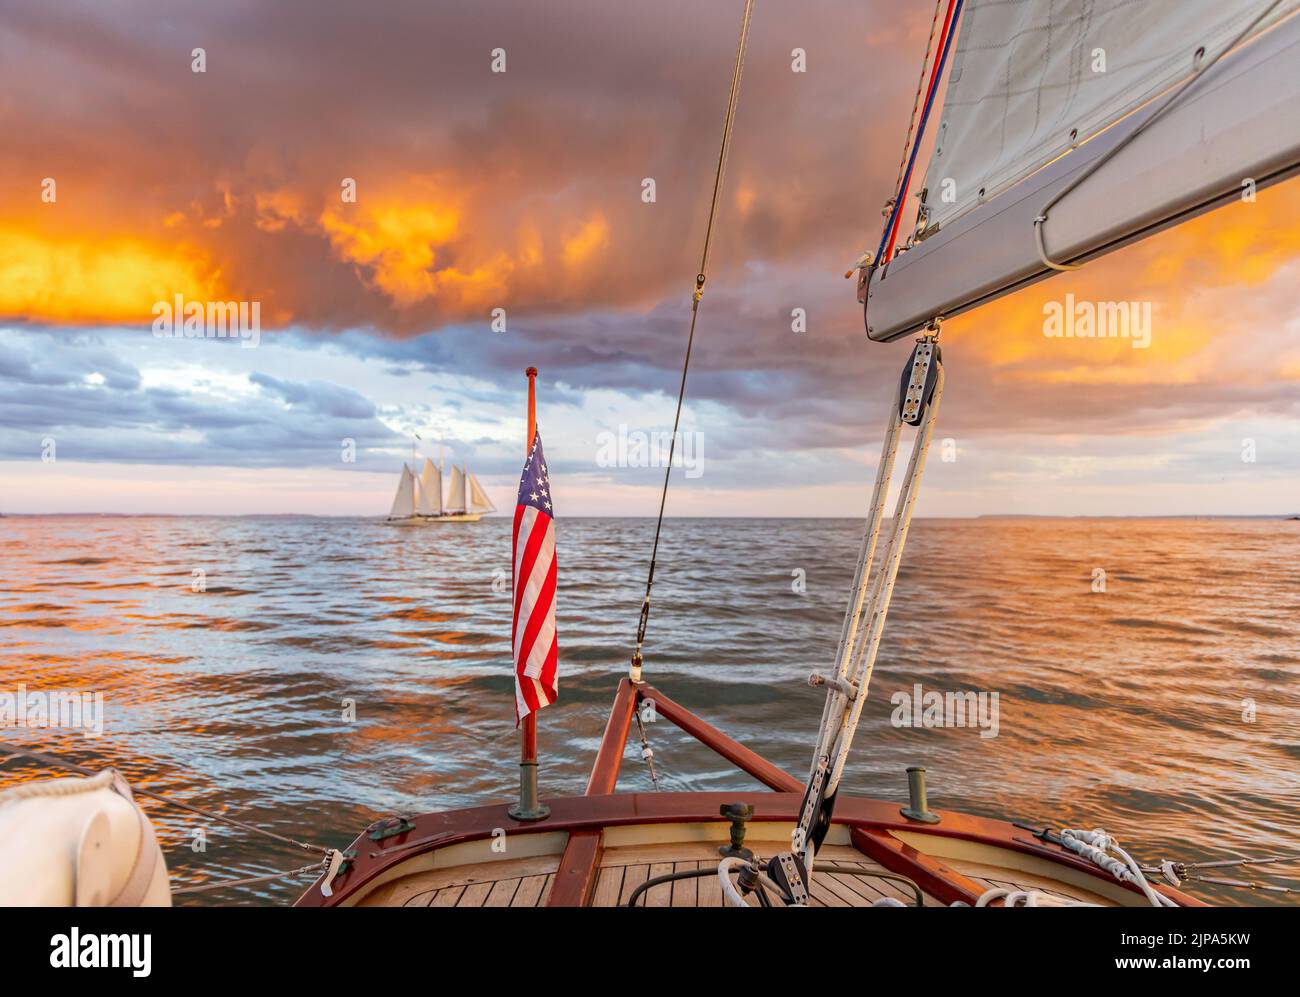 Sailing on a small sailboat with view of an incredible sunset and distant sail boat Stock Photo